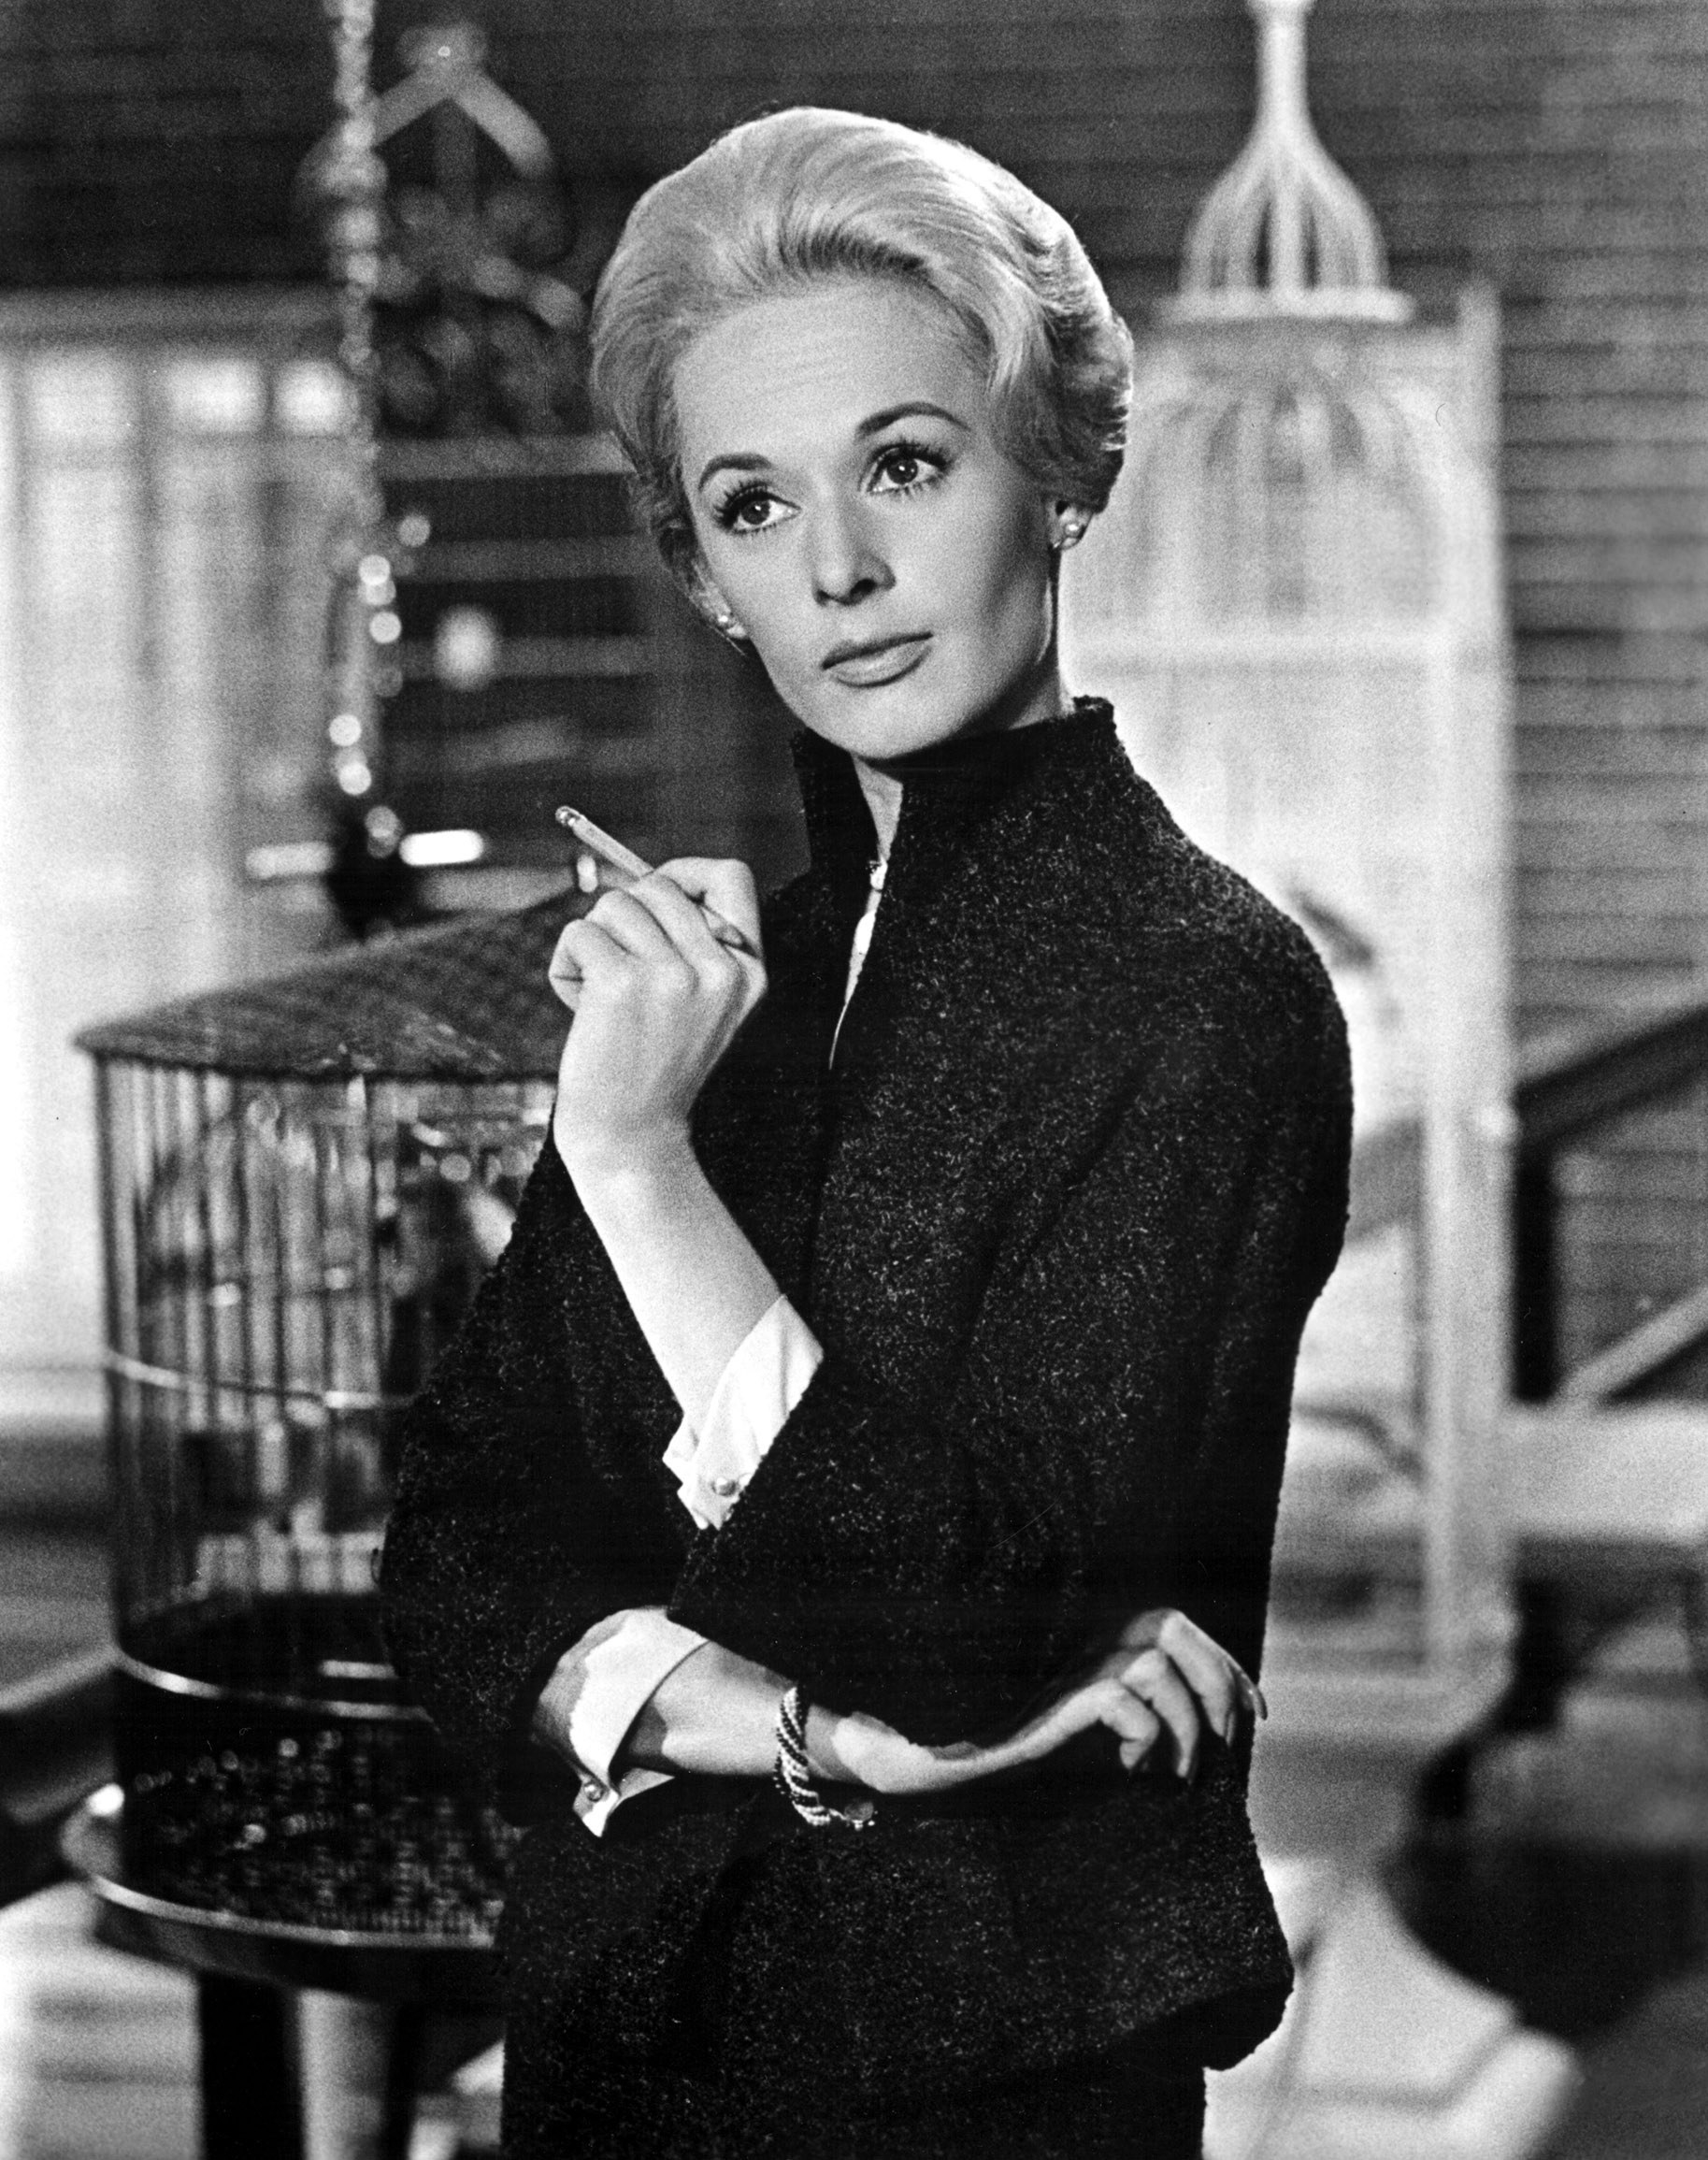 Hedren holds a cigarette while crossing her arms